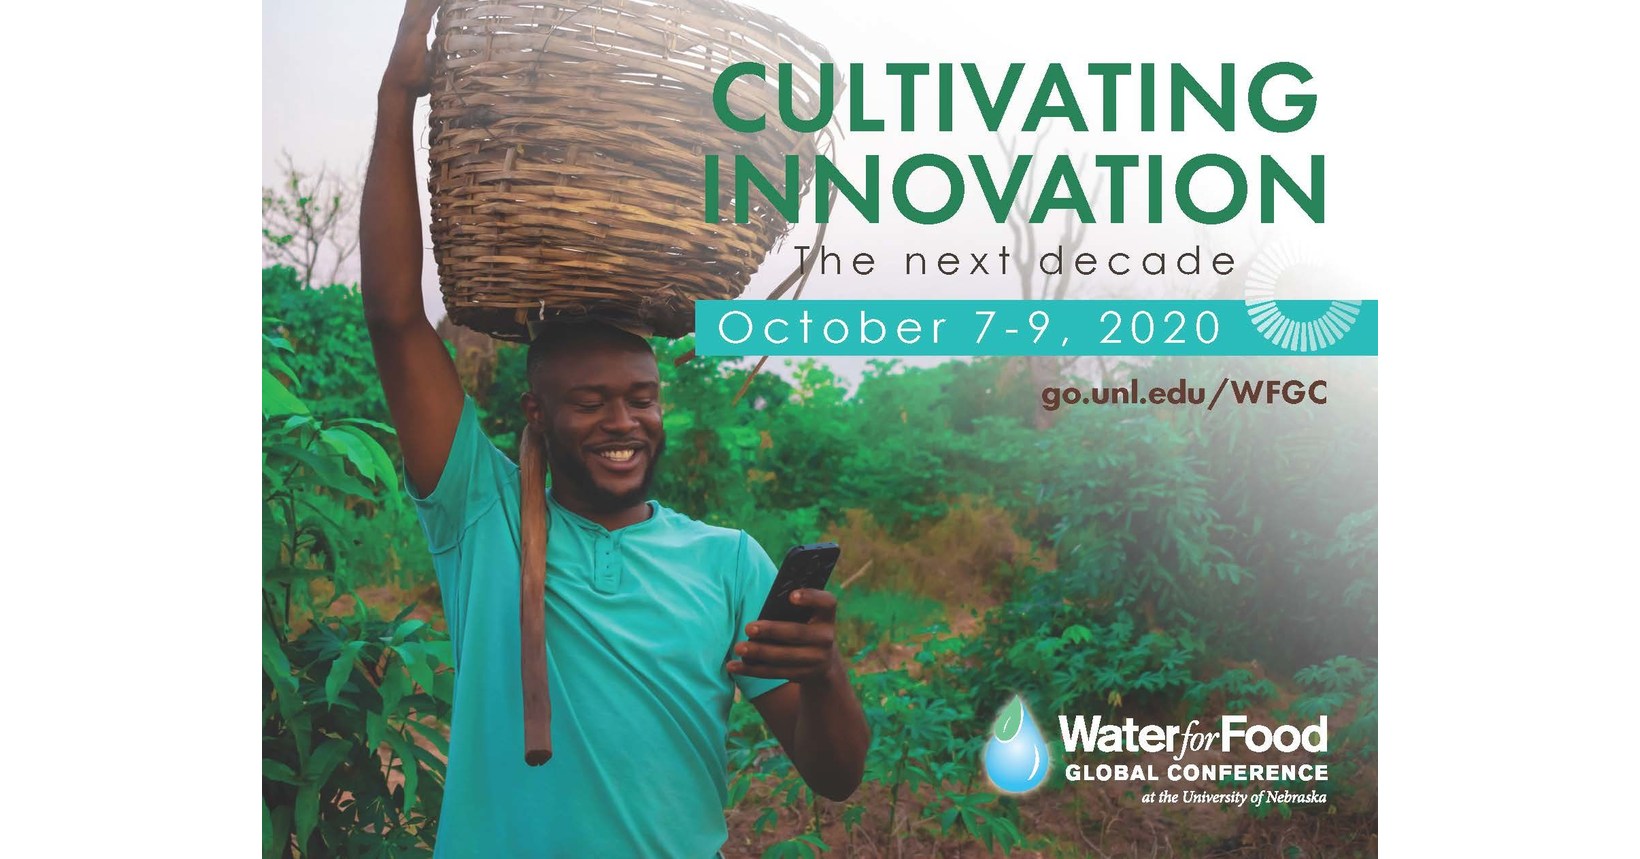 2020 Water for Food Global Conference Call for Session Proposals